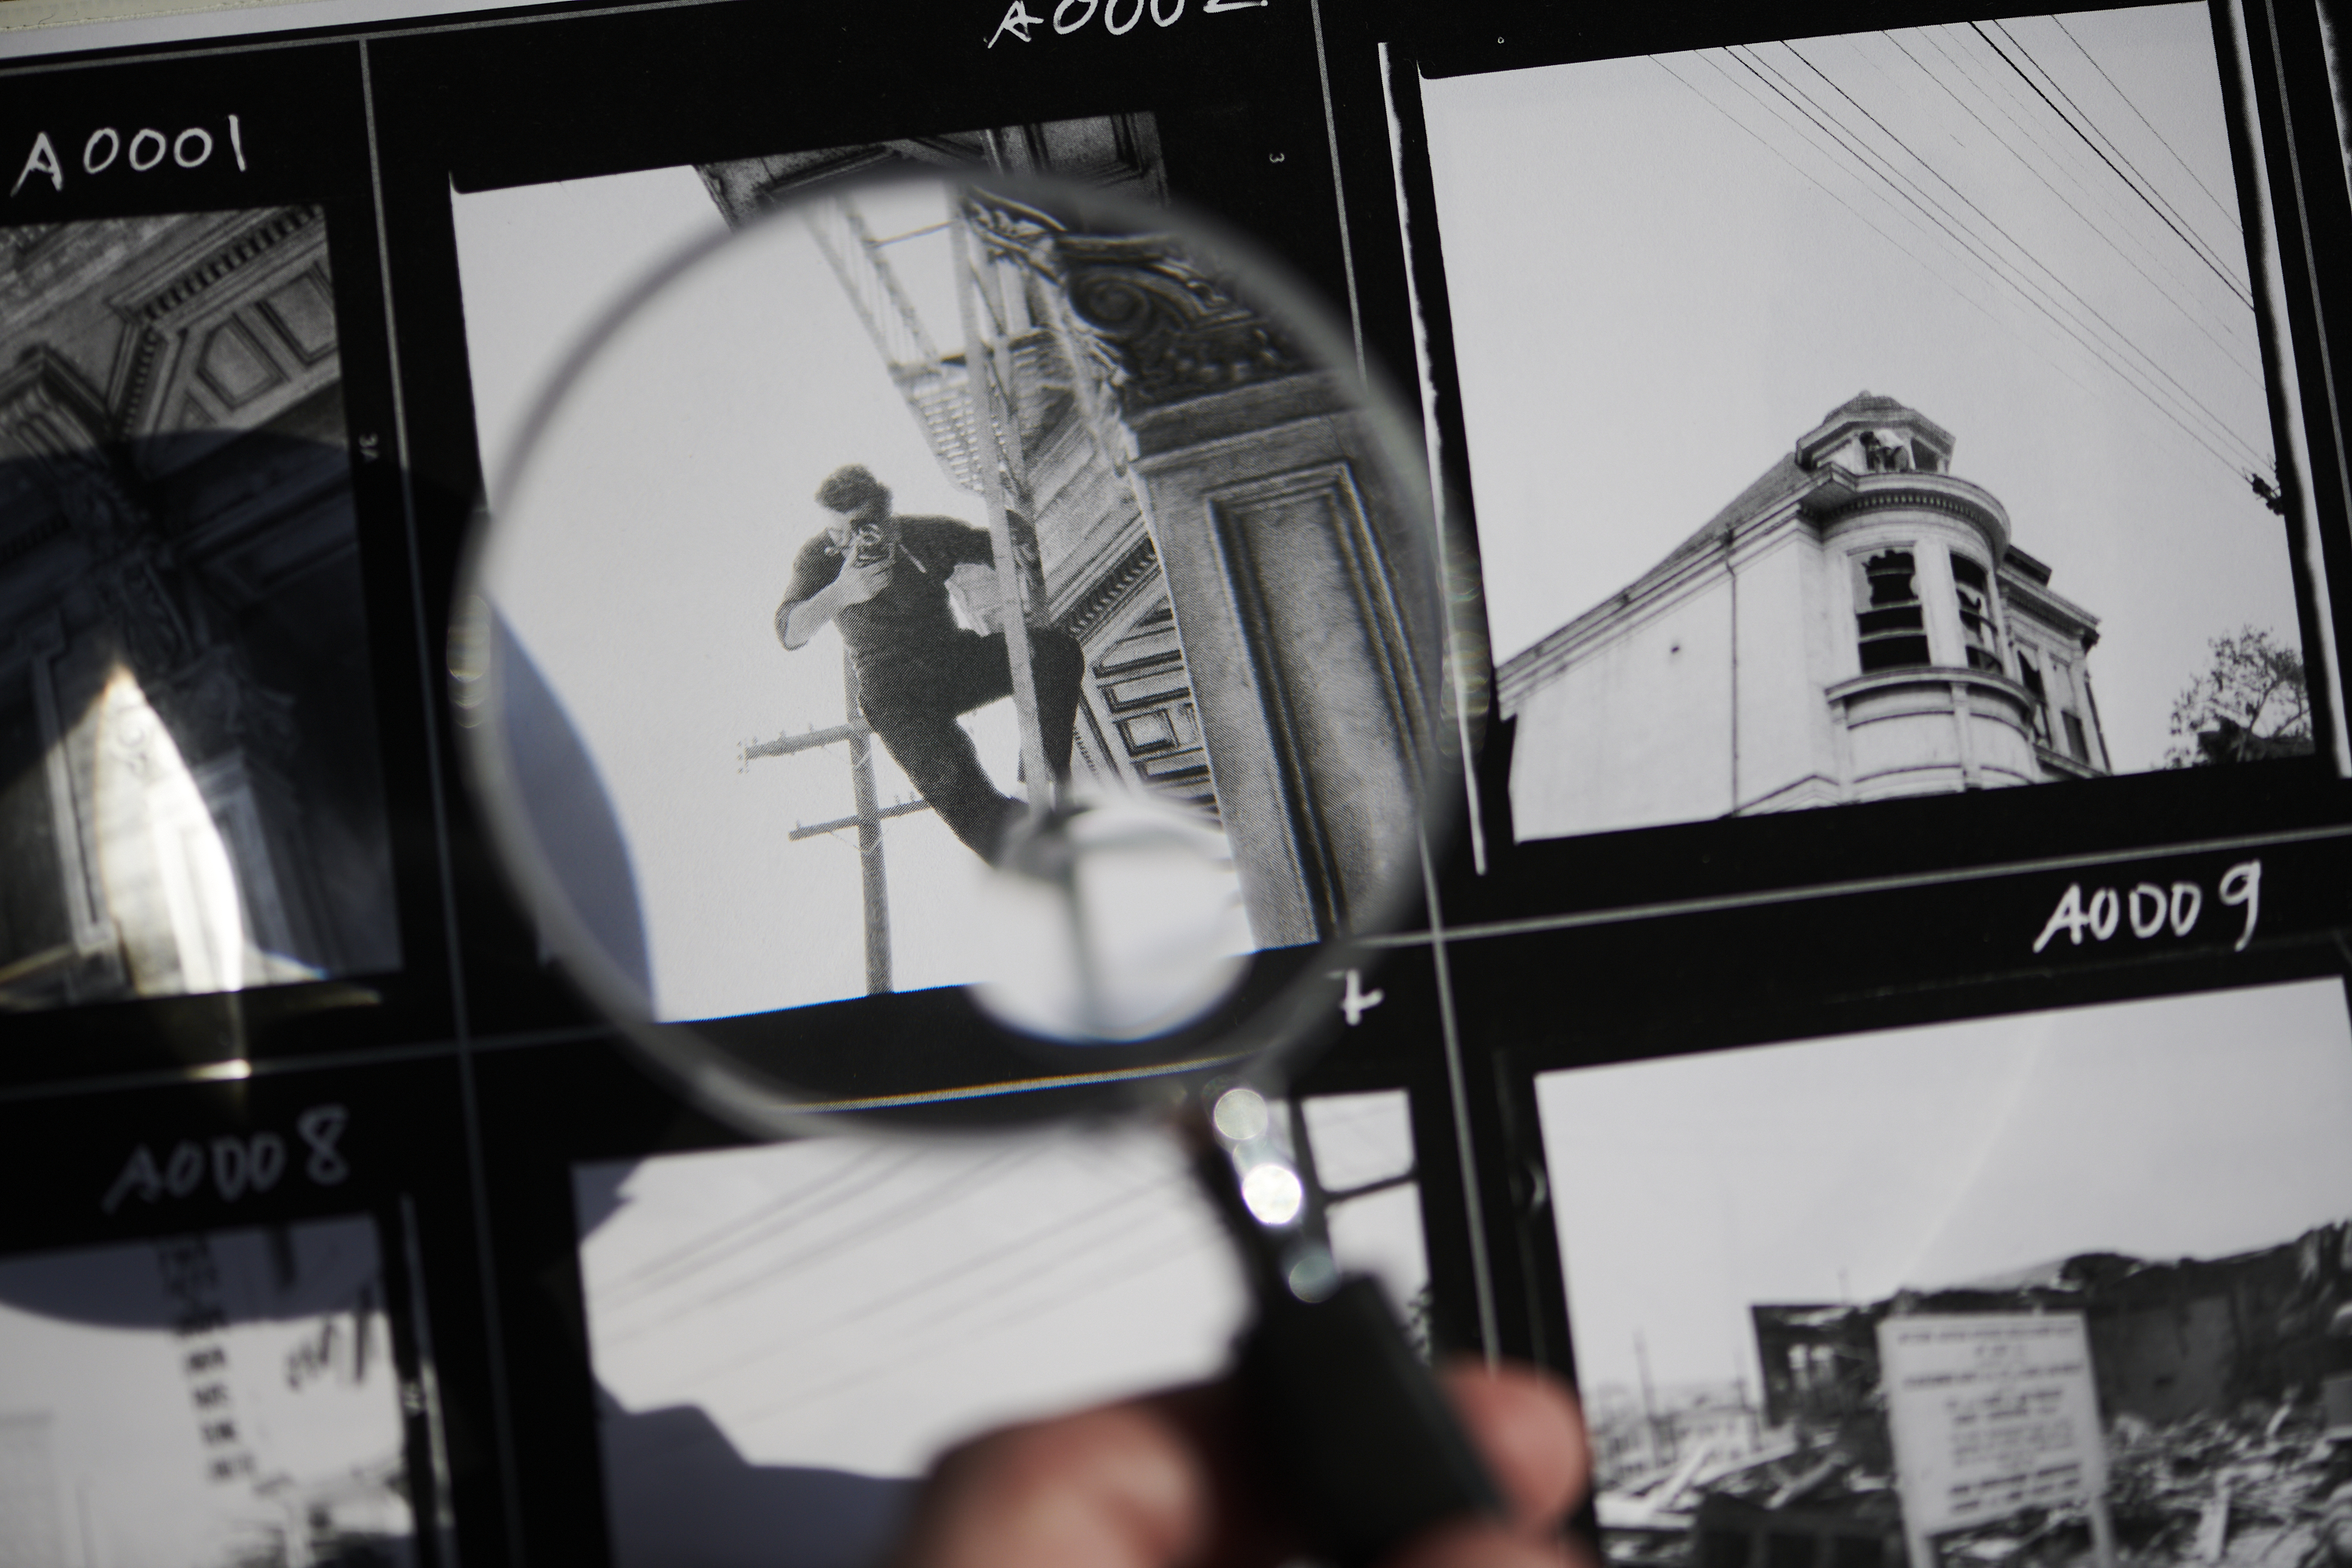 A magnifying glass focuses on a film strip image of a person climbing a pole, surrounded by other black-and-white photos.